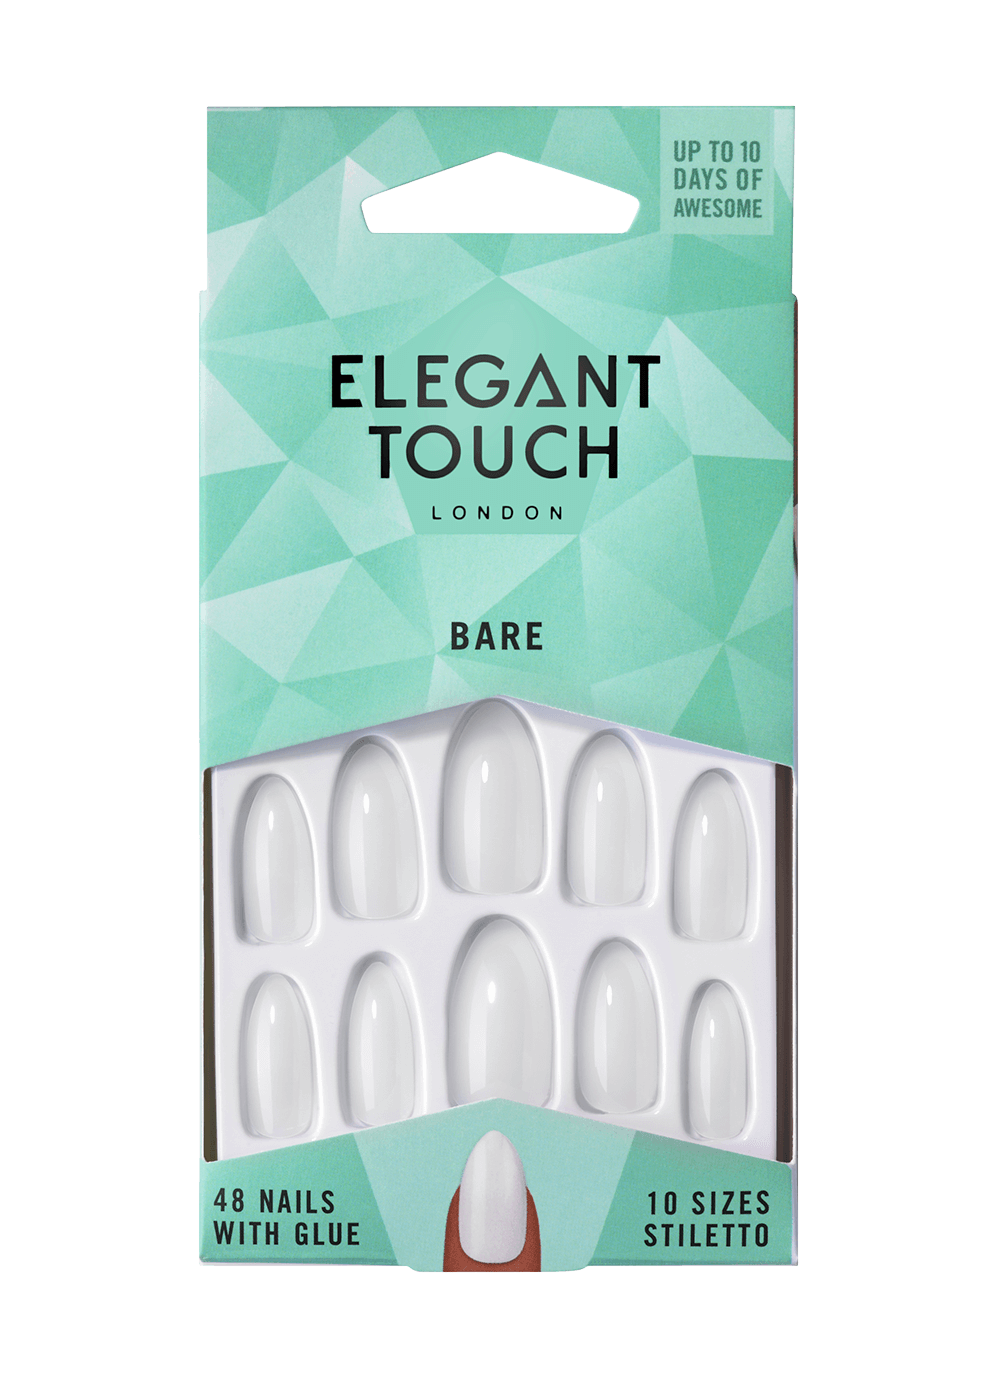 Elegant Touch Totally Bare Nails